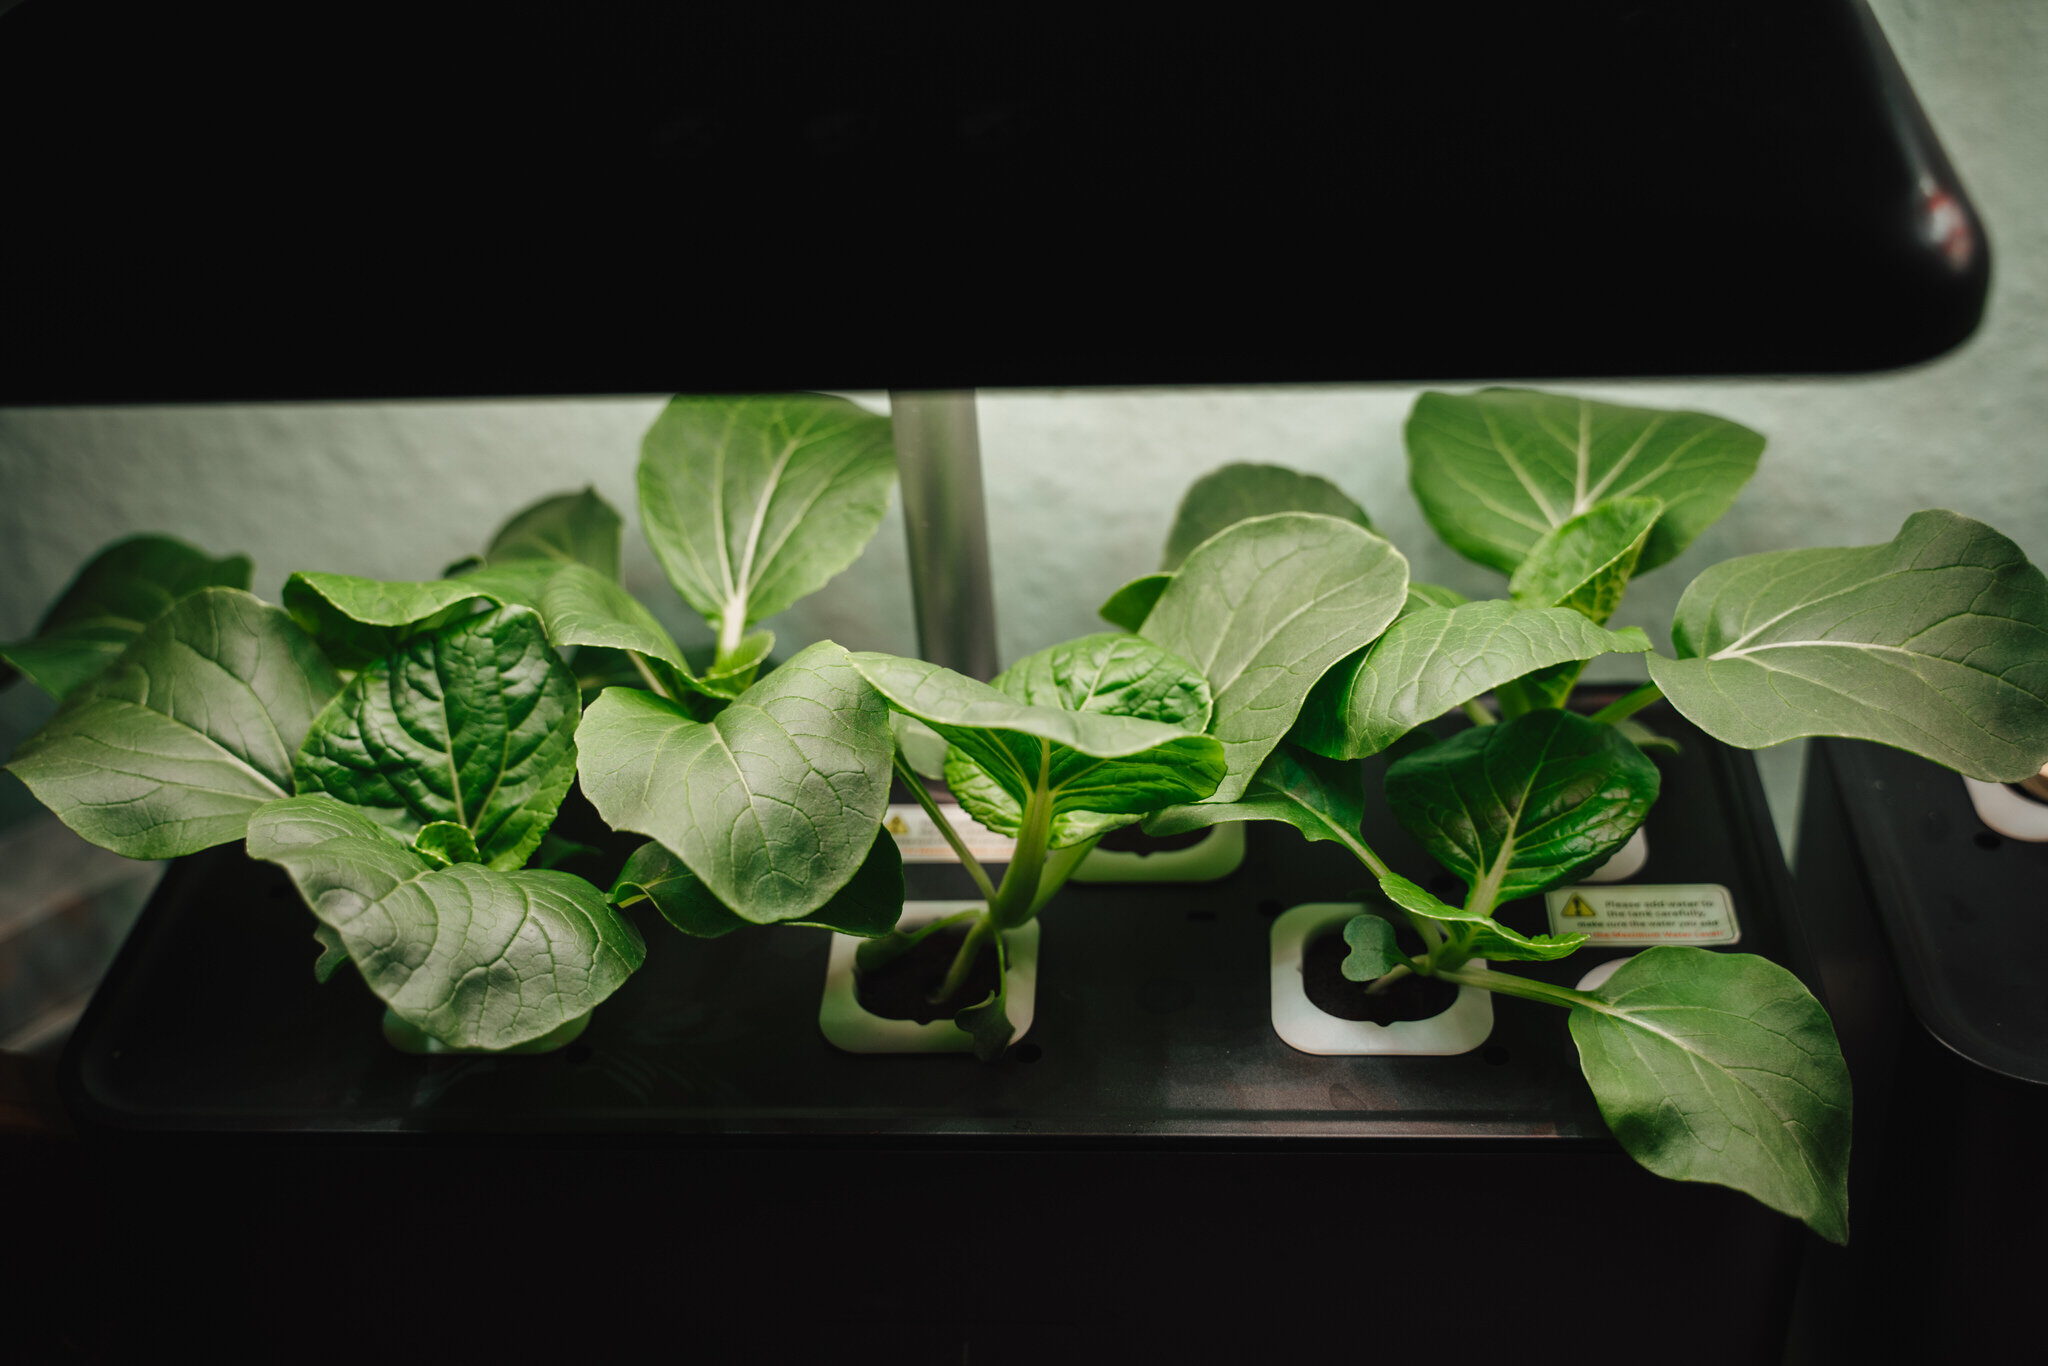 Growing Vegetables Indoors Without Soil nor Sun - Hydroponic Systems 44.JPG